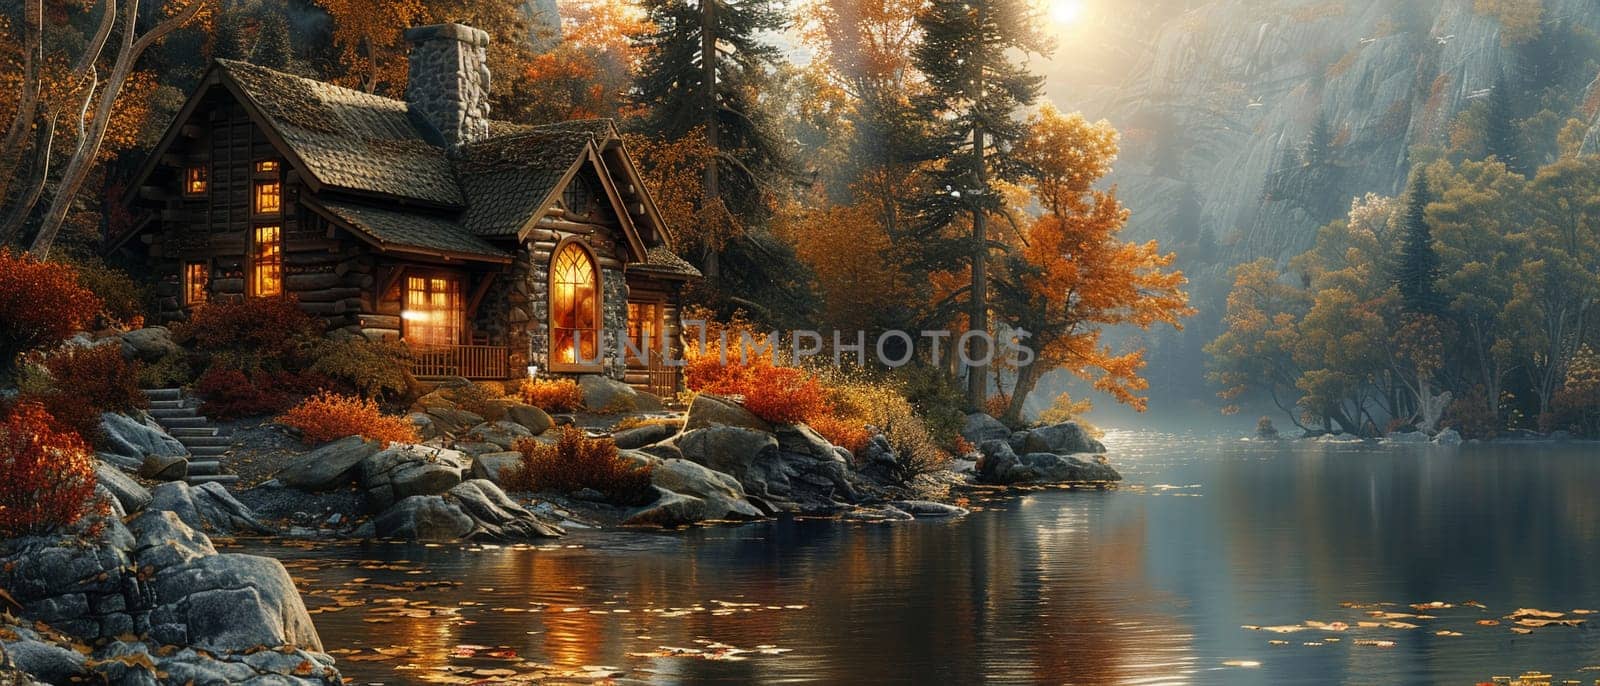 Rustic cabin in the woods depicted with a Thomas Kincade-like focus on light and idyllic settings. by Benzoix